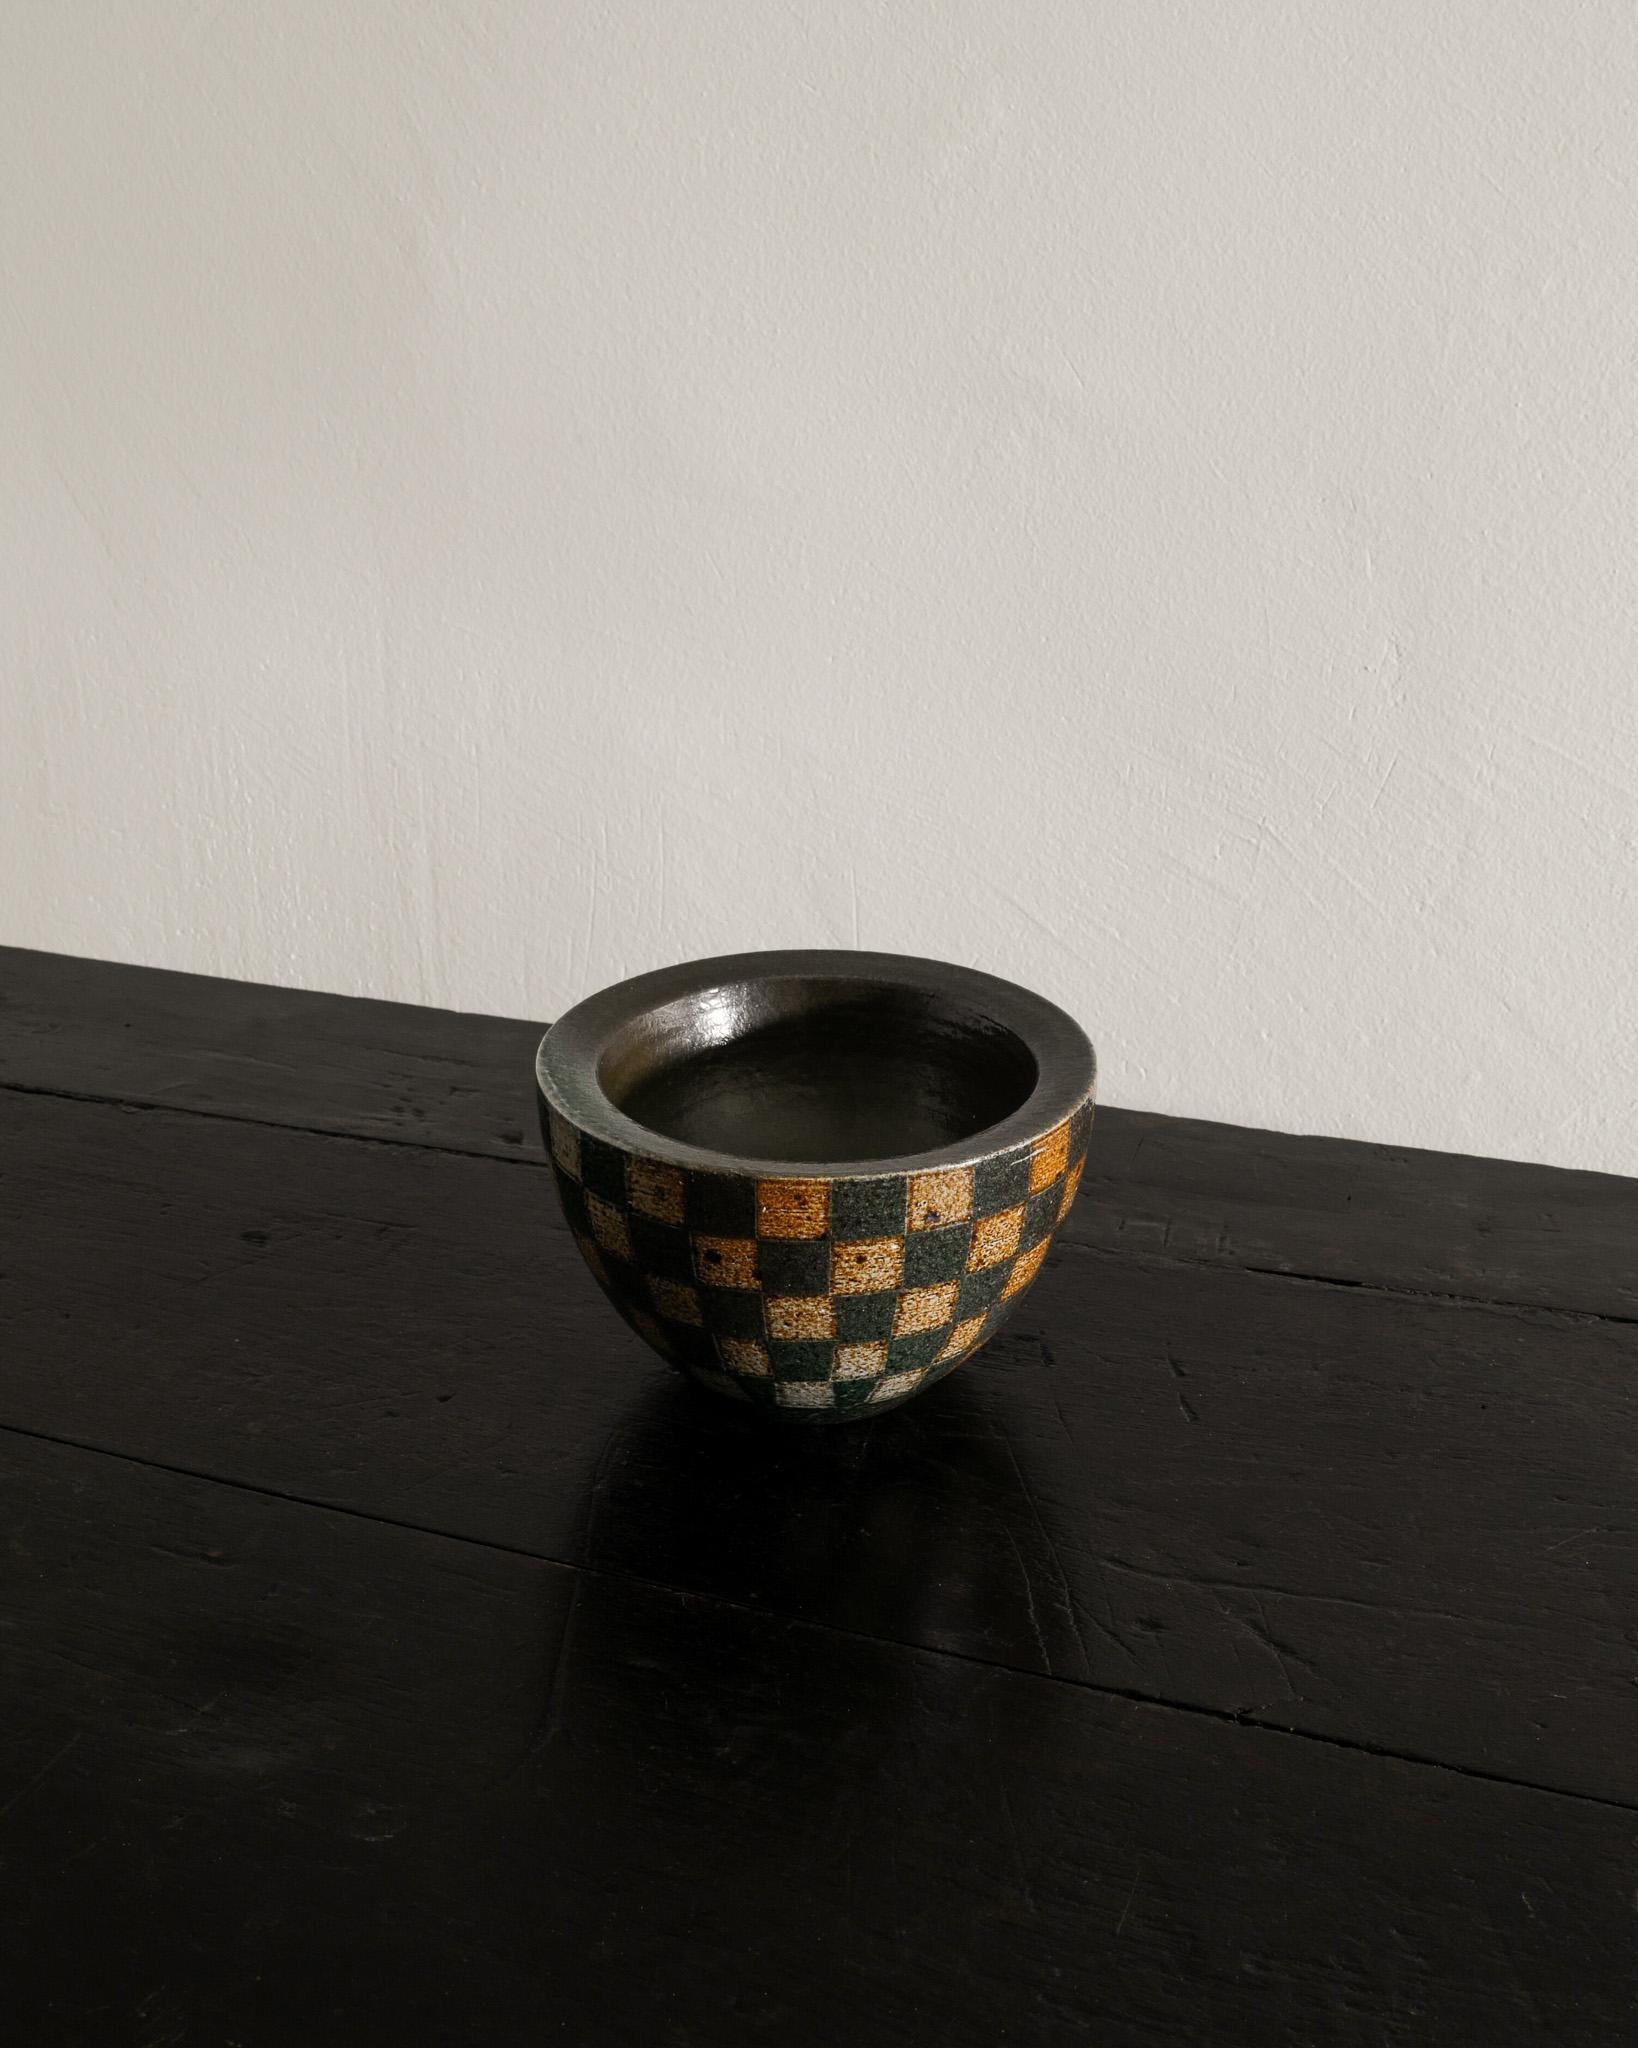 Swedish Checkered Ceramic Stoneware Bowl by Thord Karlsson Produced in Sweden, 1990s